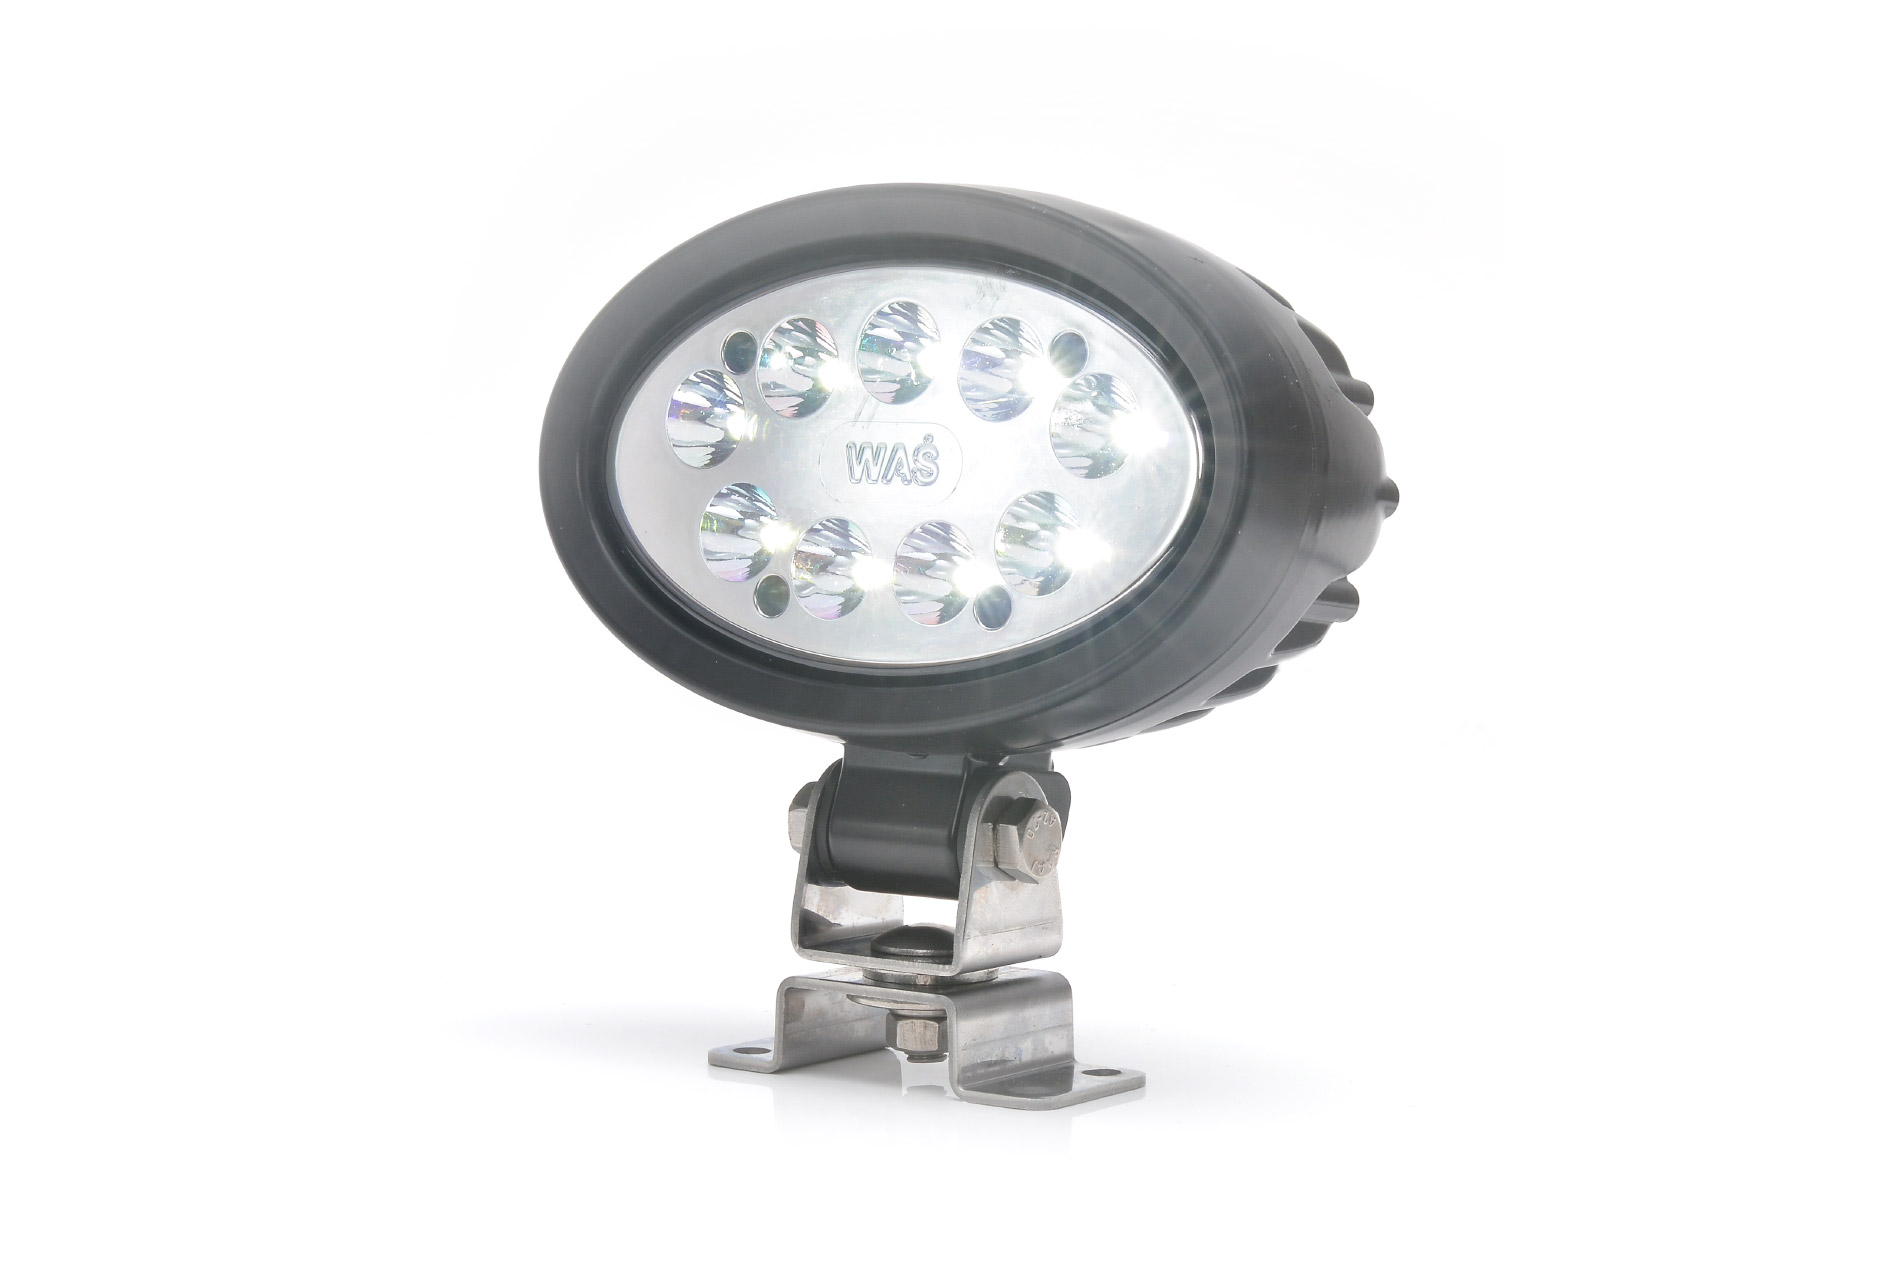 Work lamps - W164 5000